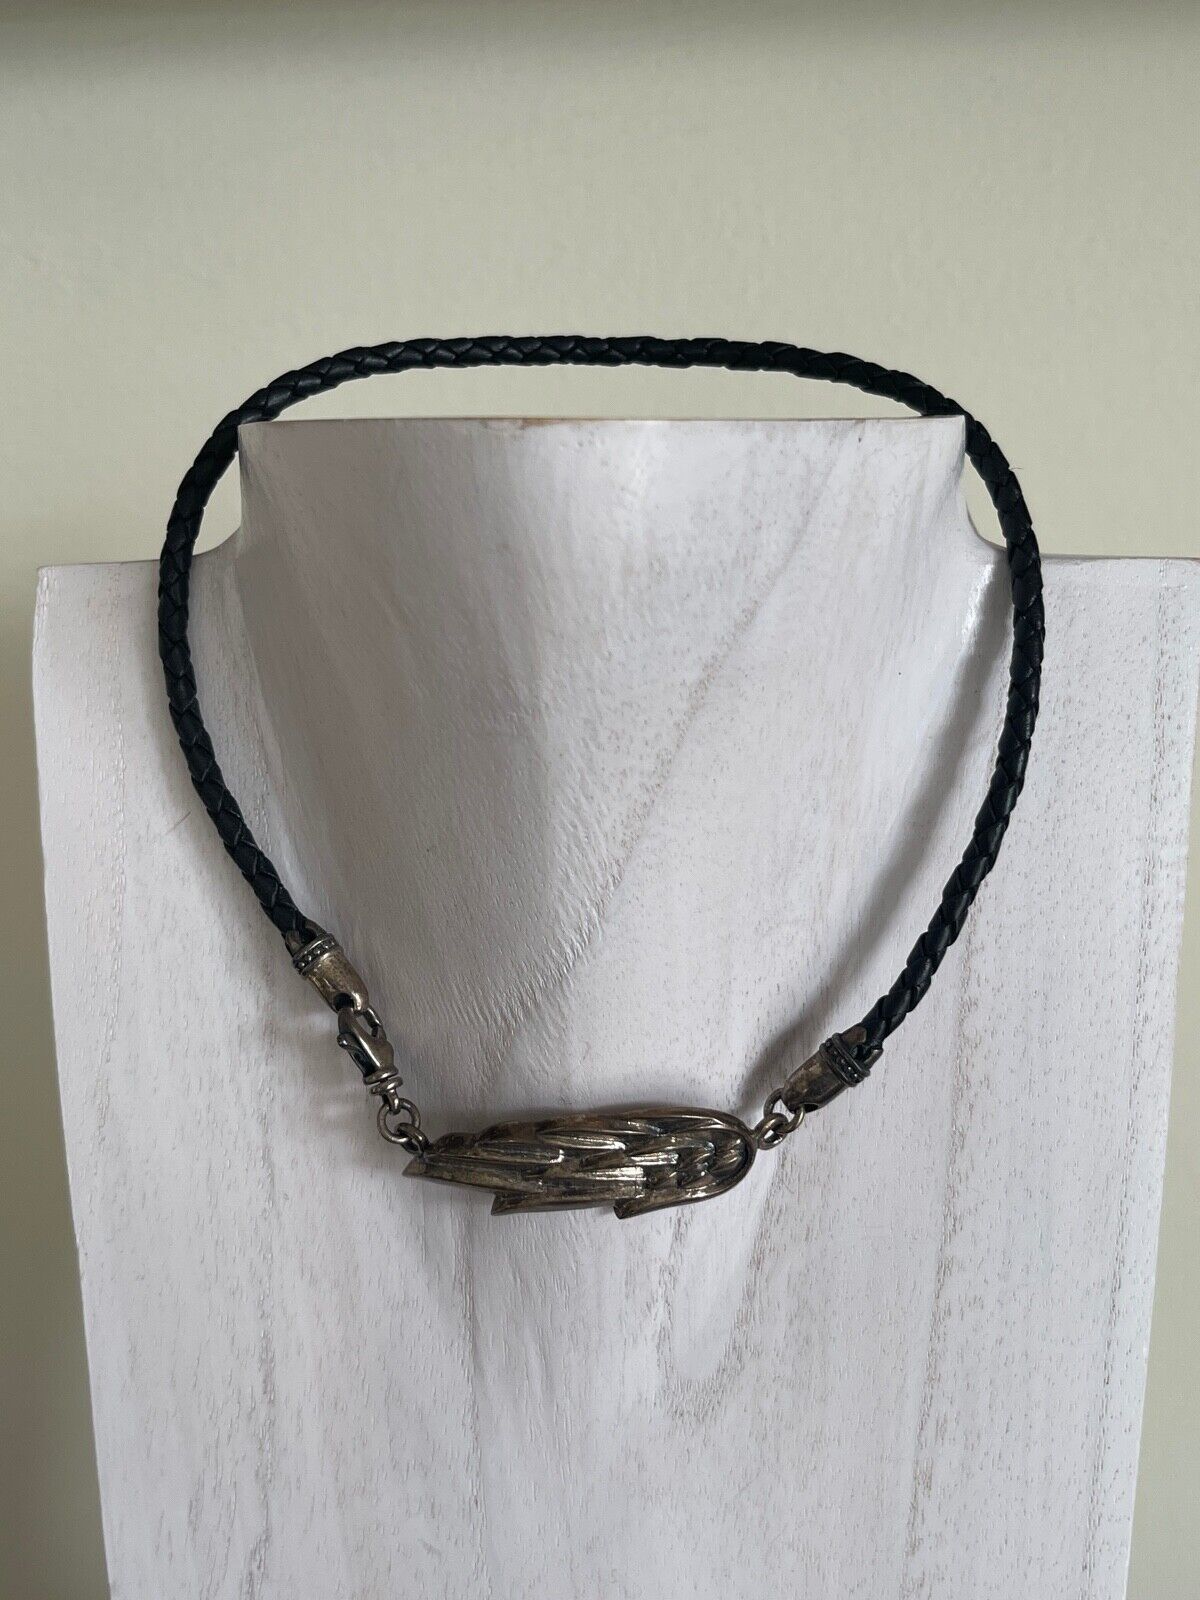 King Baby Braided Leather Chocker Necklace with Sterling Silver Feather Closure - $147.51